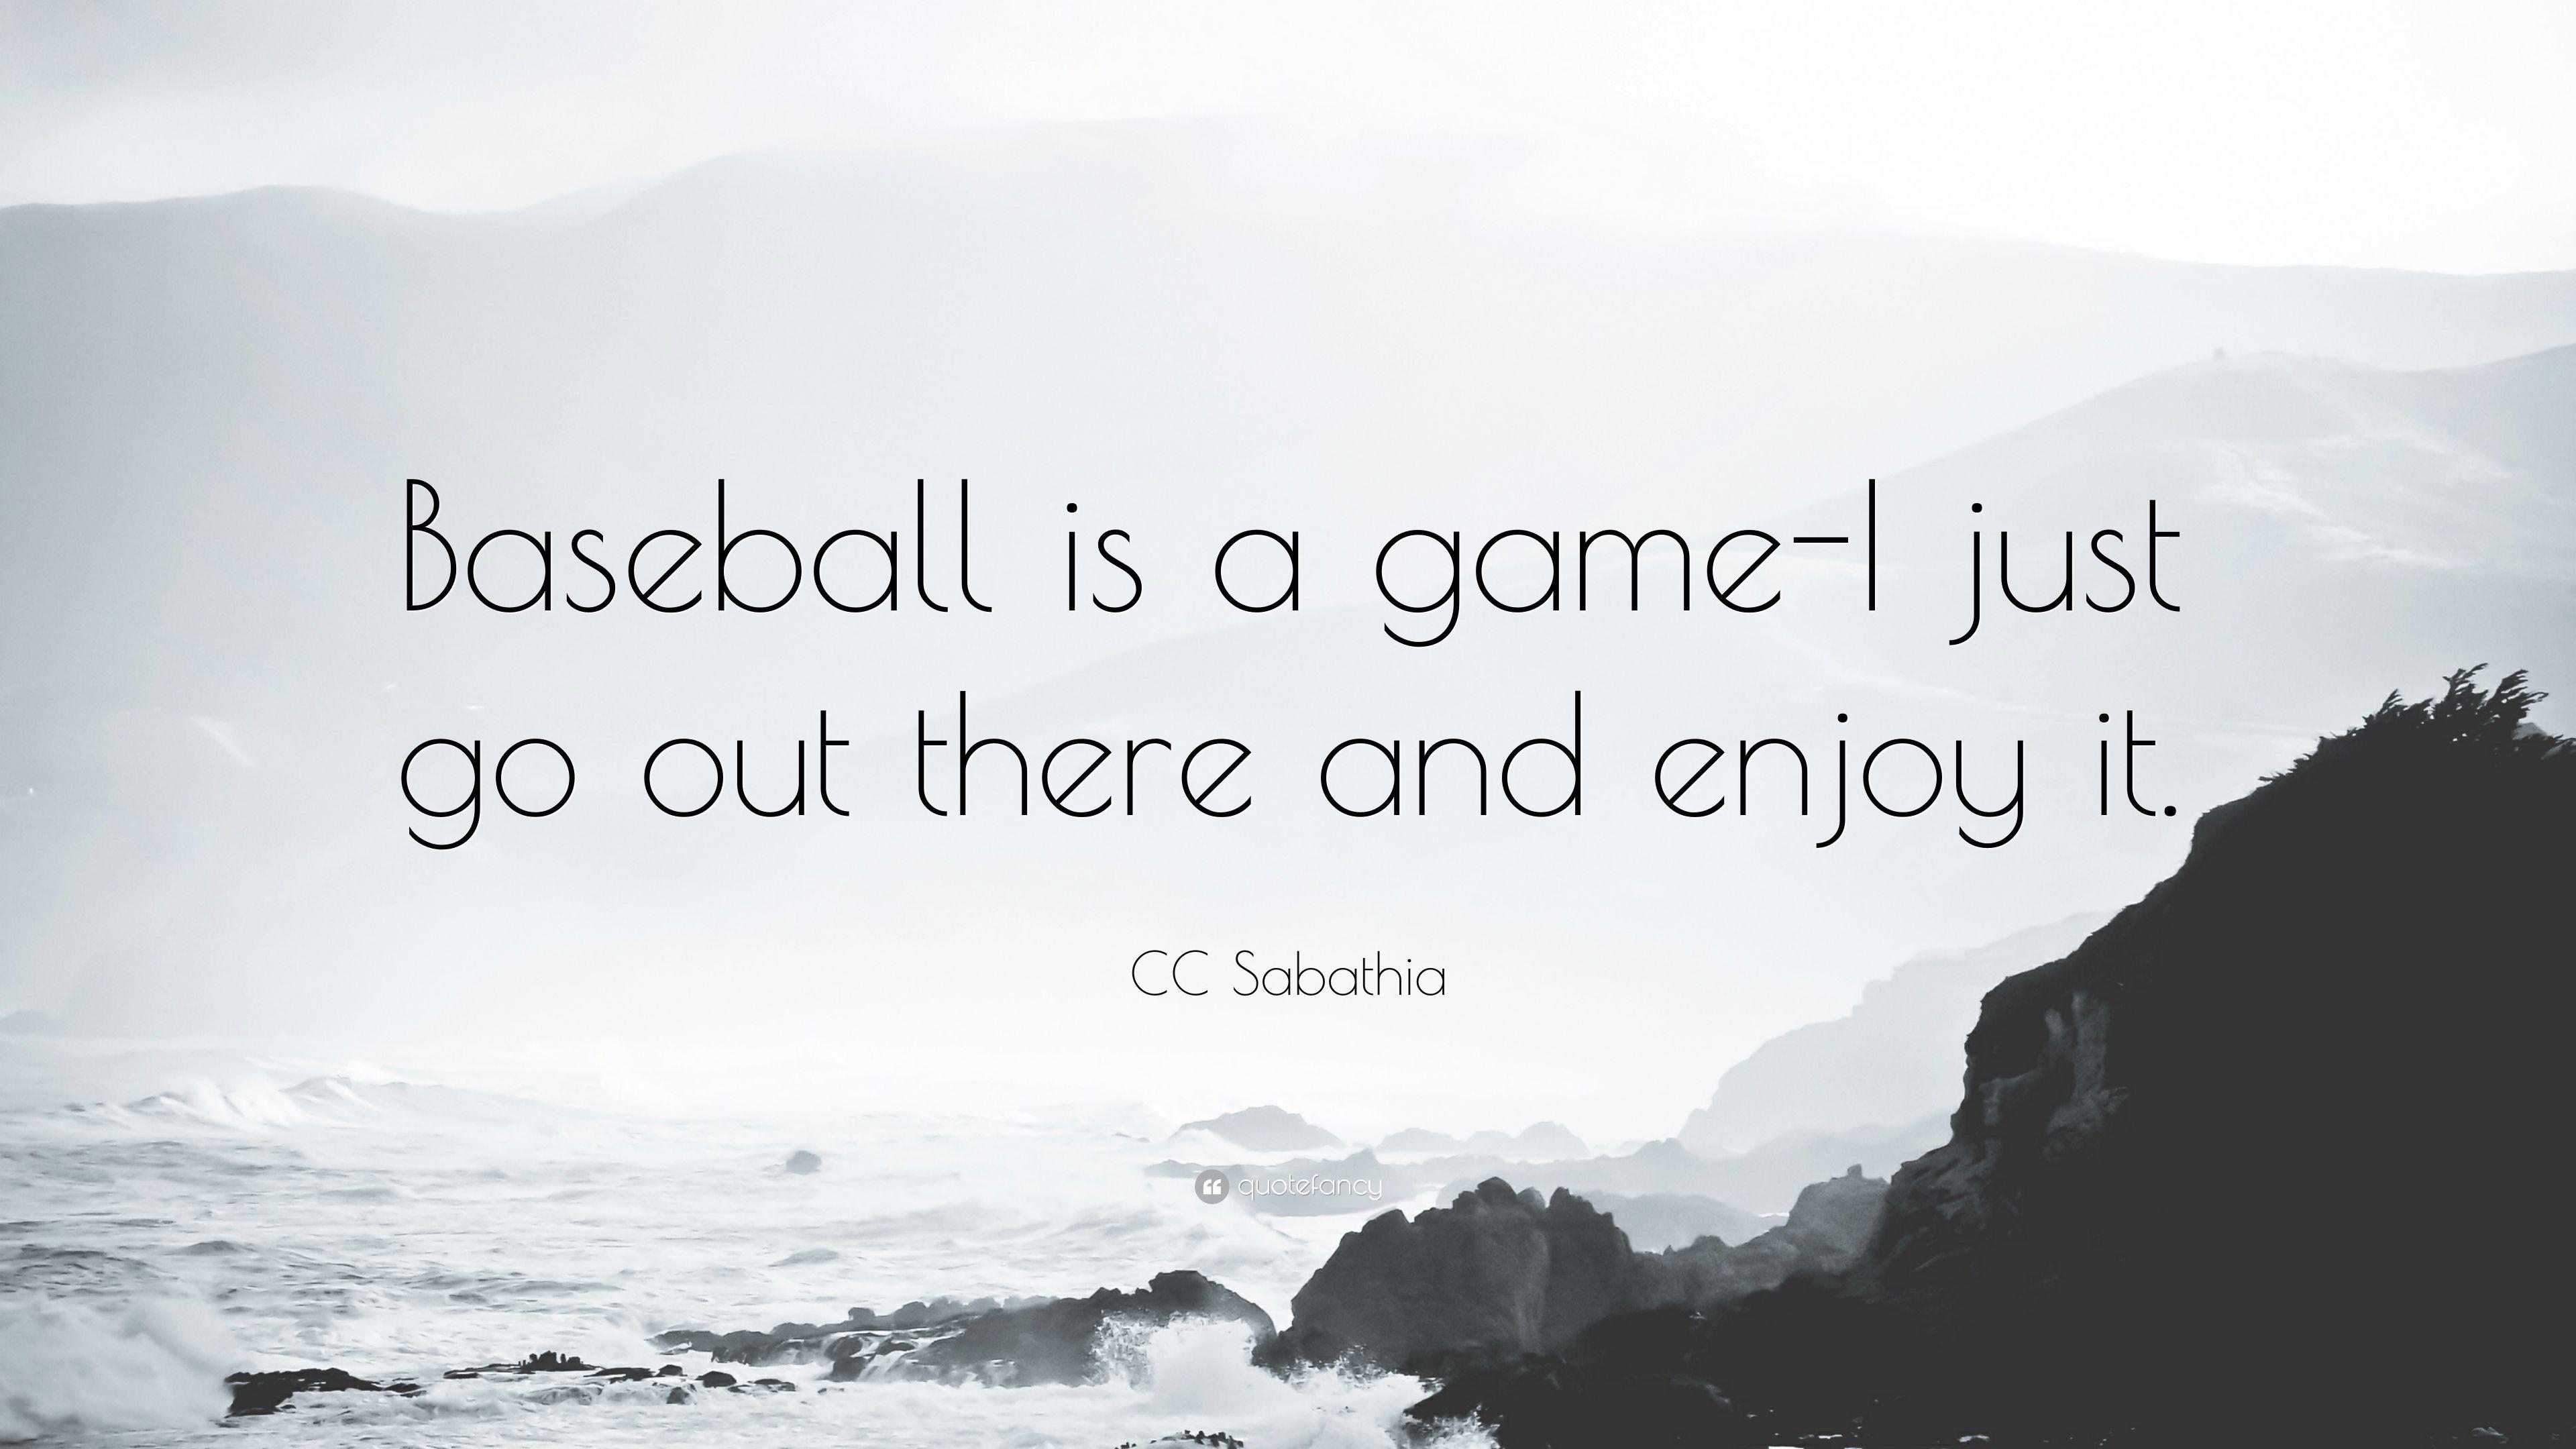 CC Sabathia Quote: “Baseball Is A Game I Just Go Out There